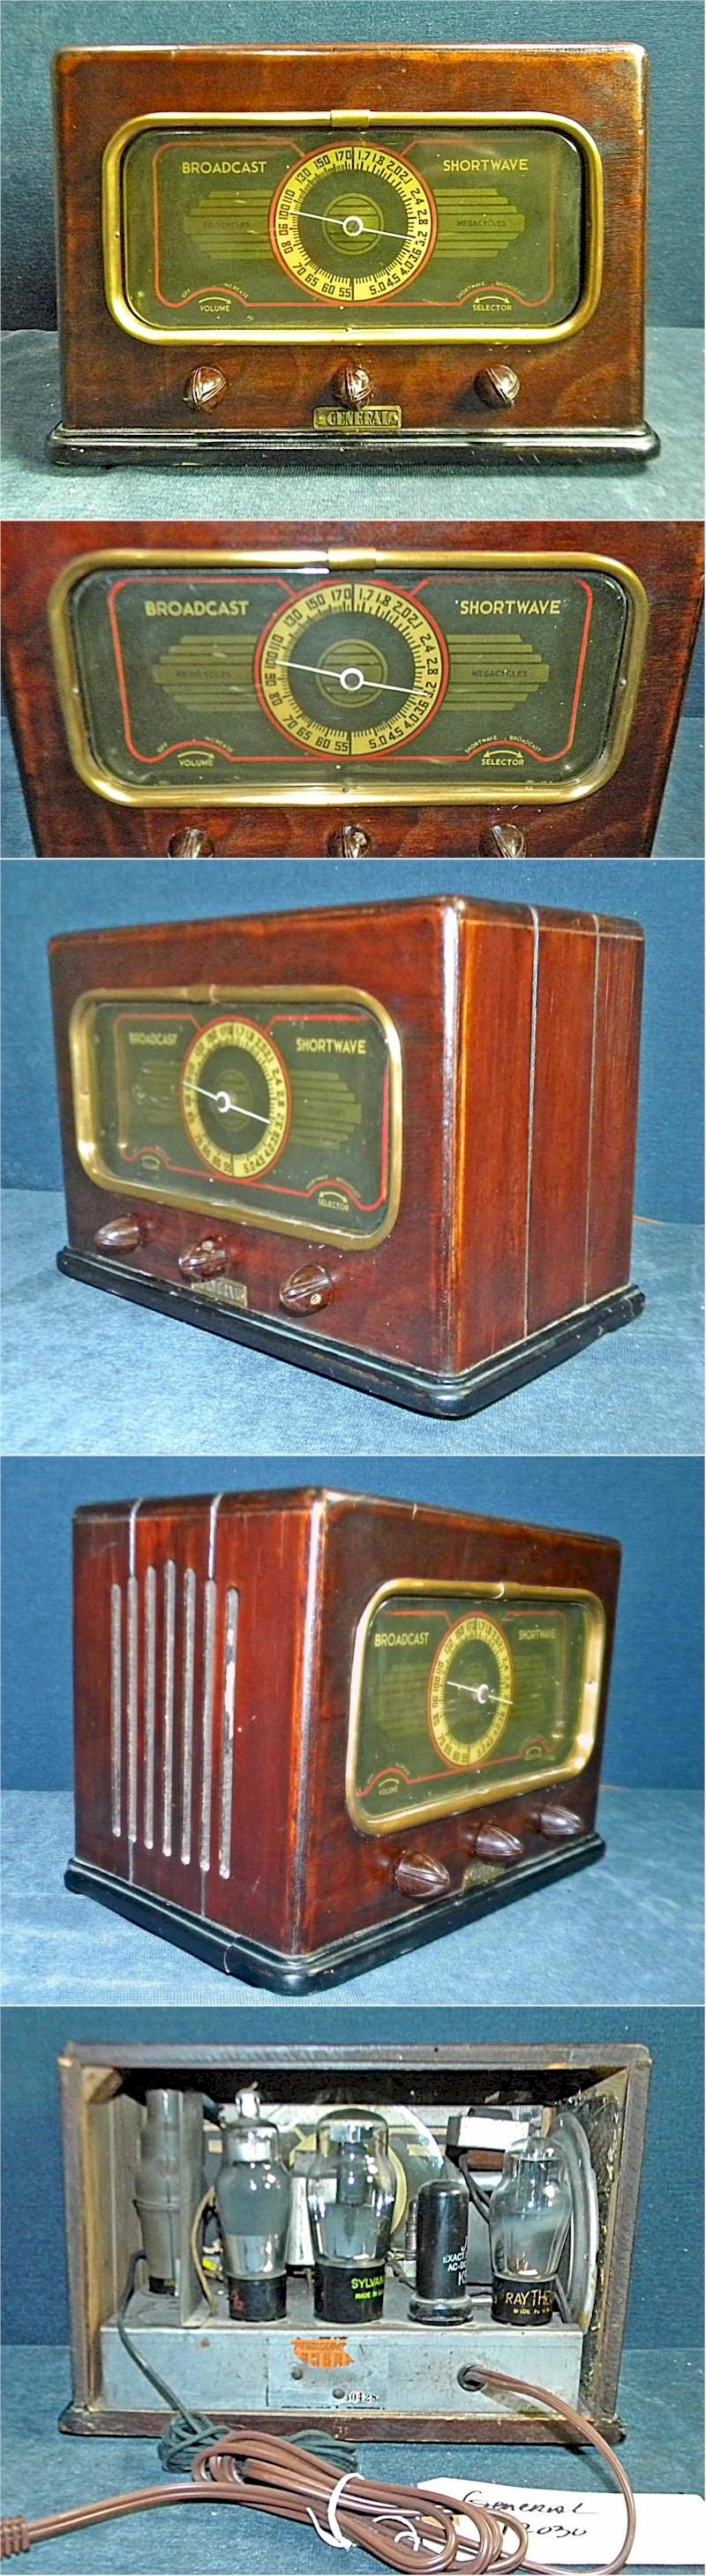 General Television 623 